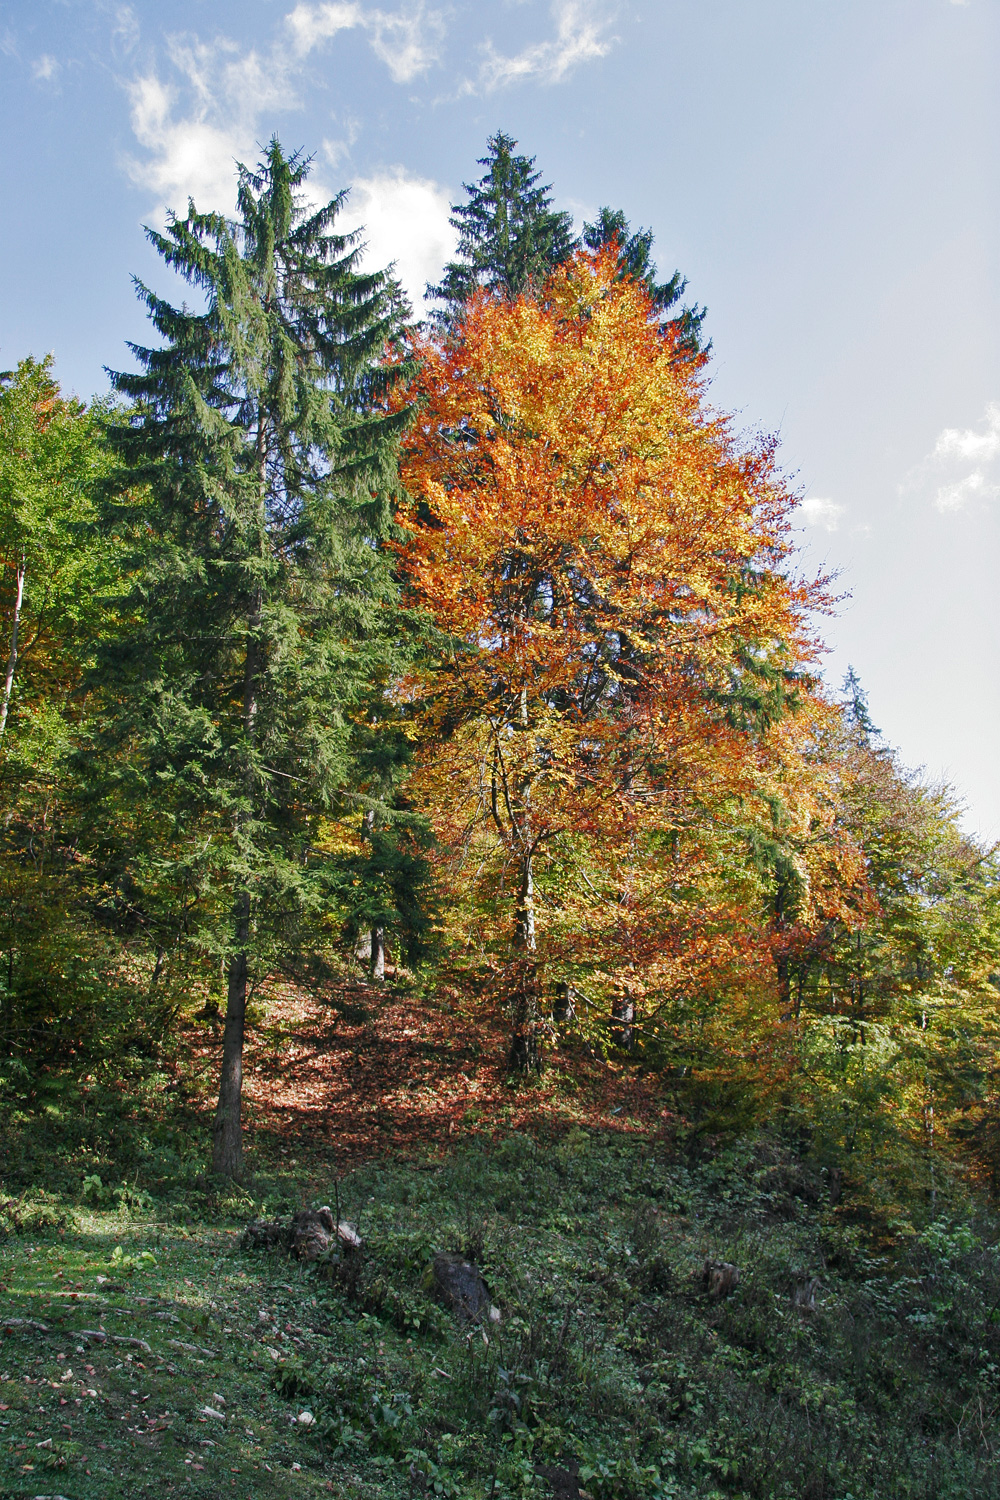 Mixed forest in autumn